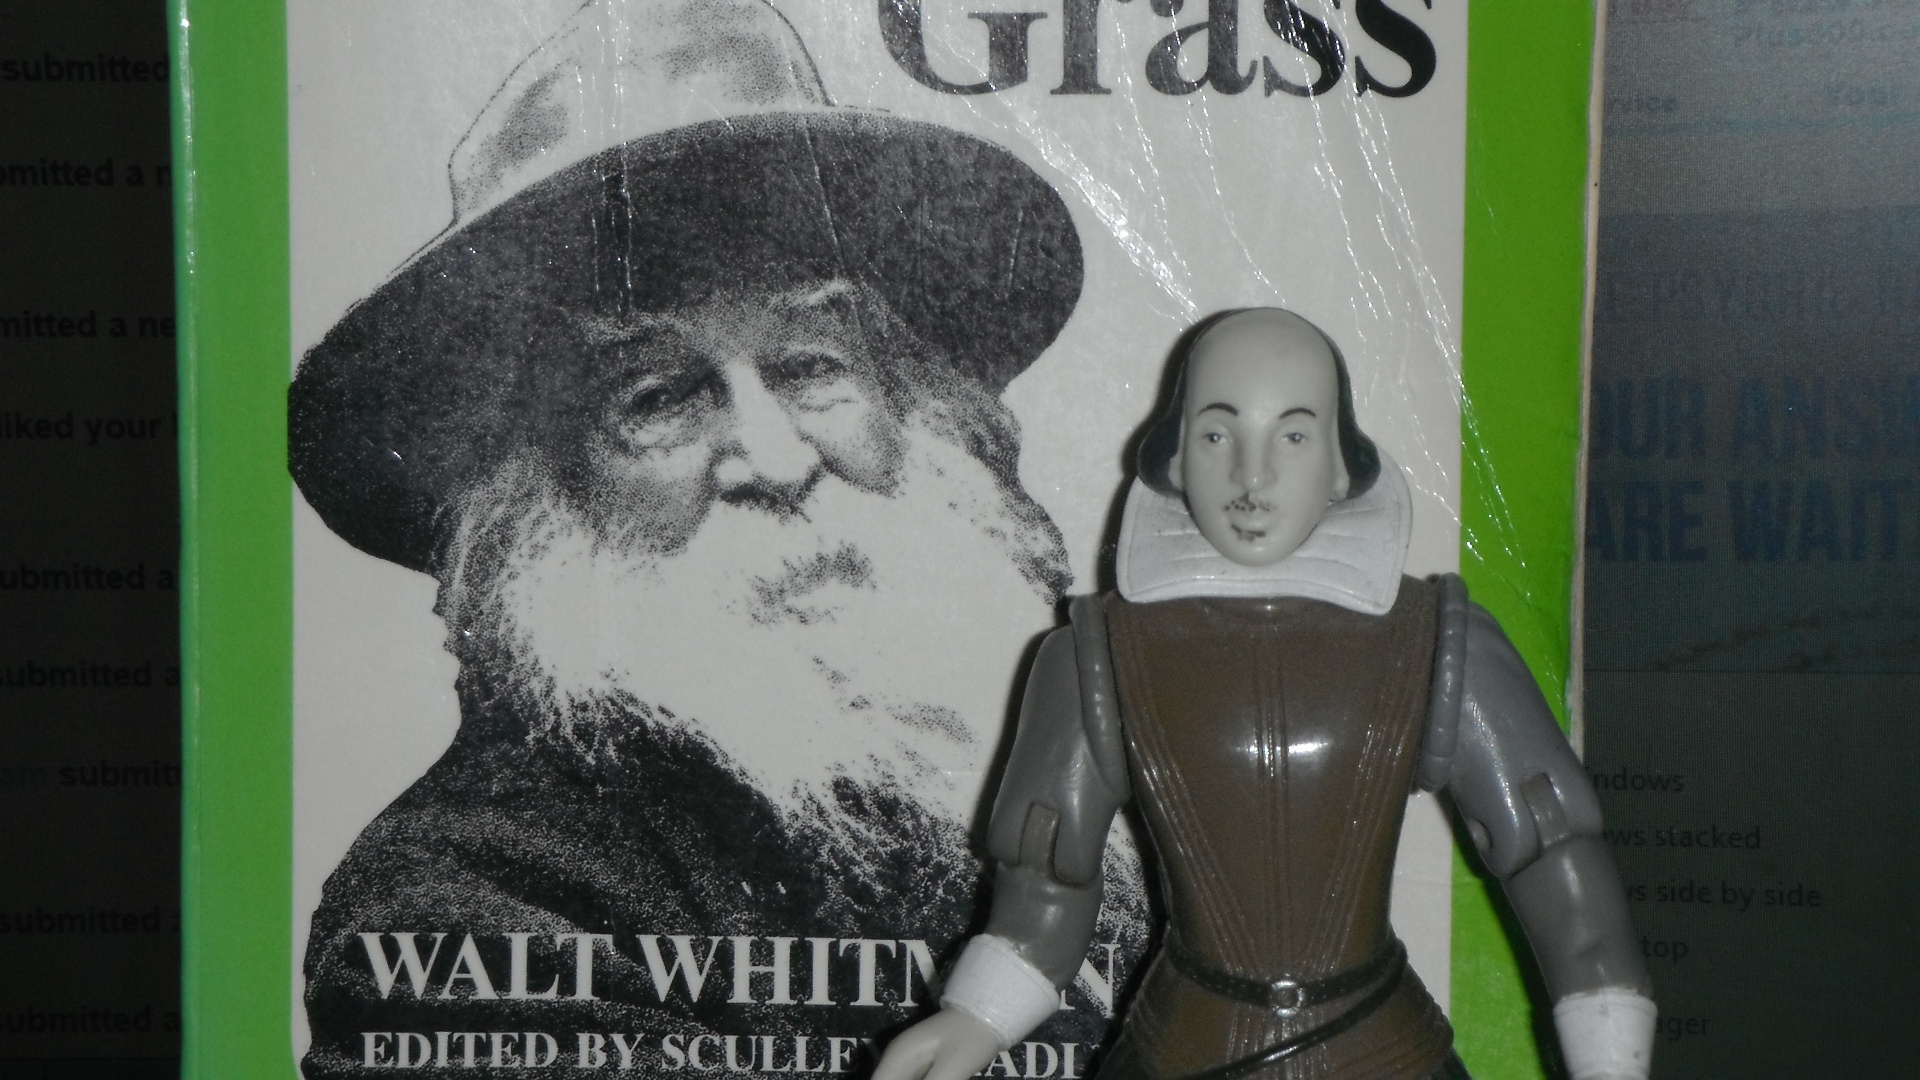 Photo taken by me –Walt Whitman, and William Shakespeare 